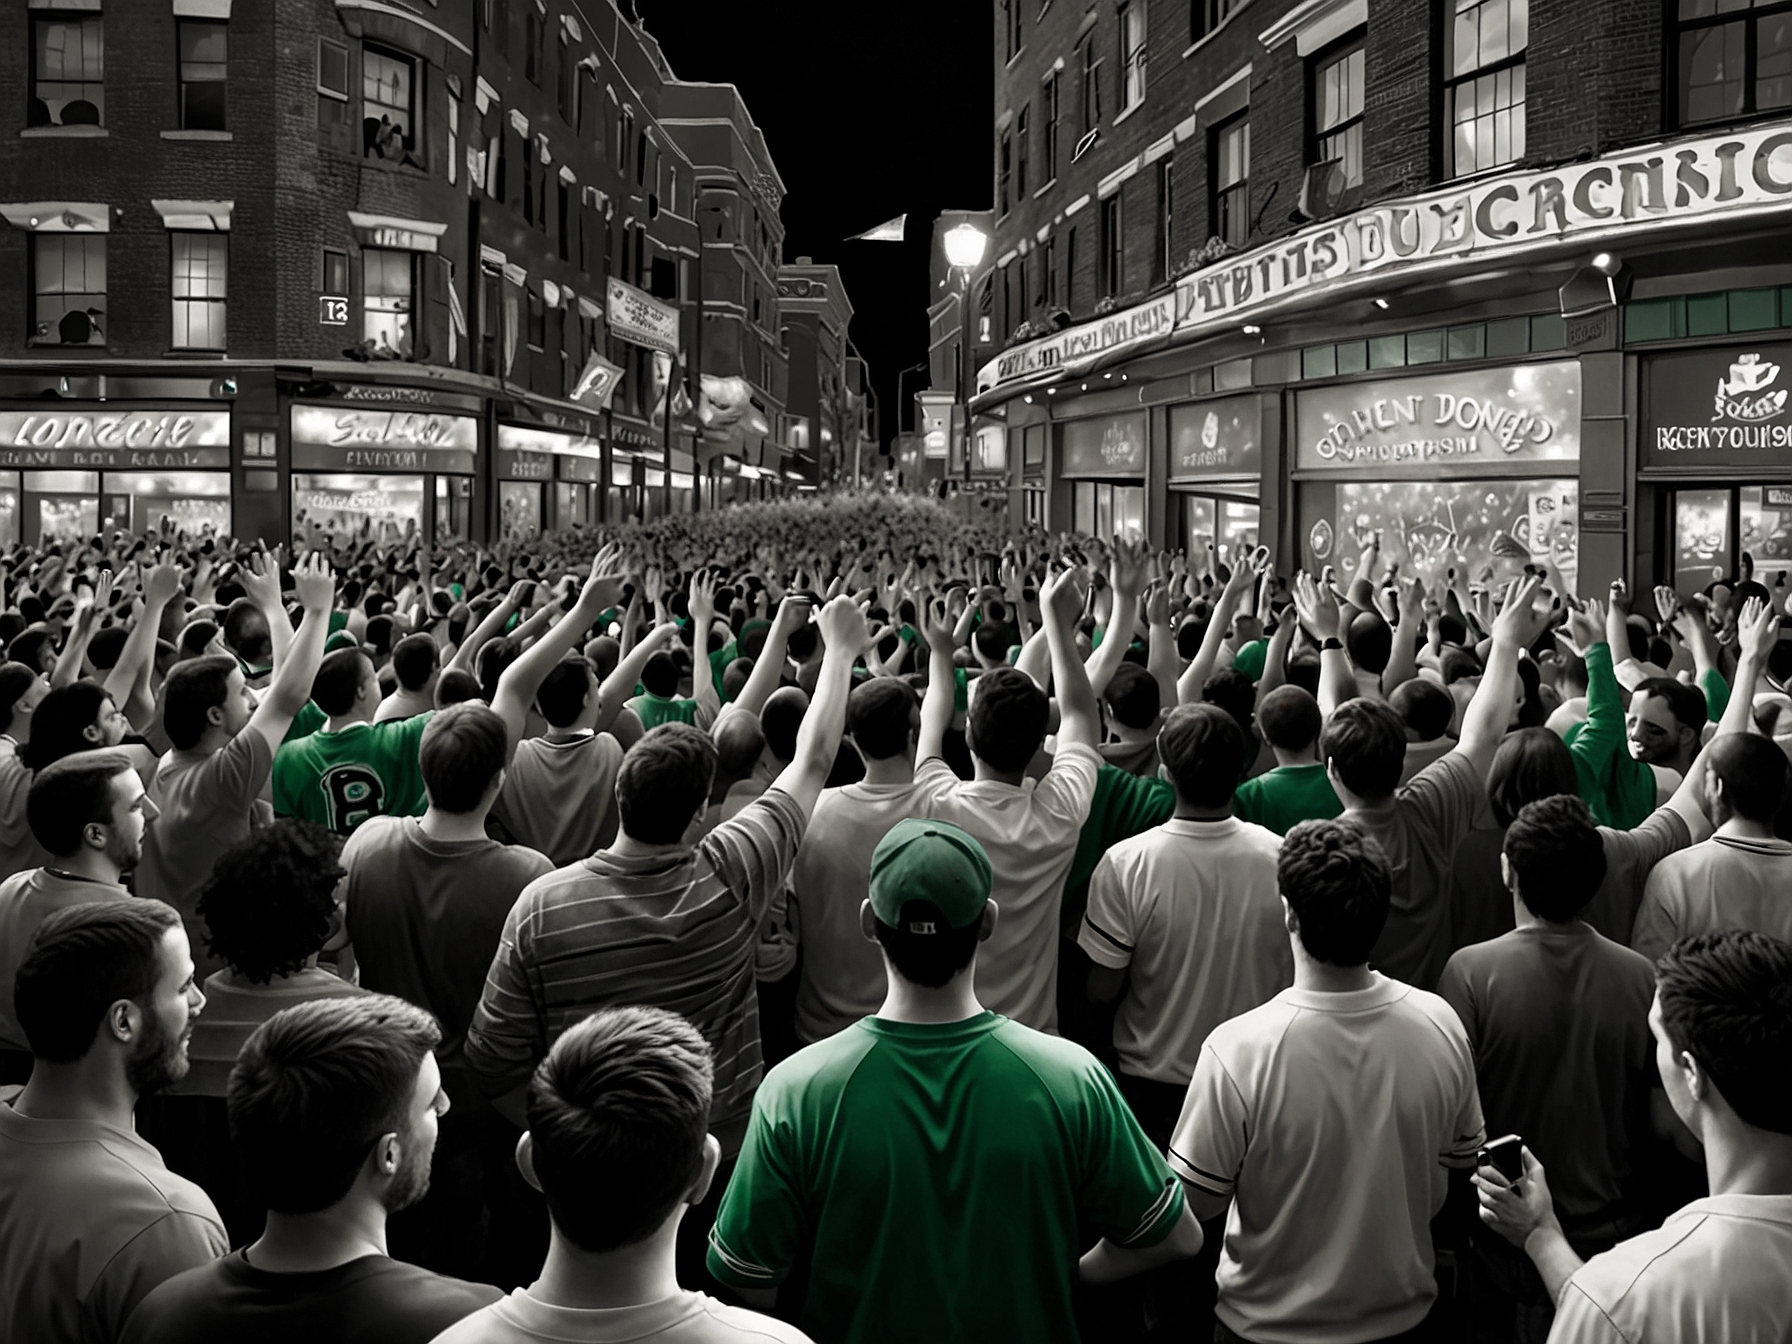 Crowds at the TD Garden and along the streets of Boston celebrate the Celtics' NBA championship victory, reveling in the team's successful season and long-awaited triumph.